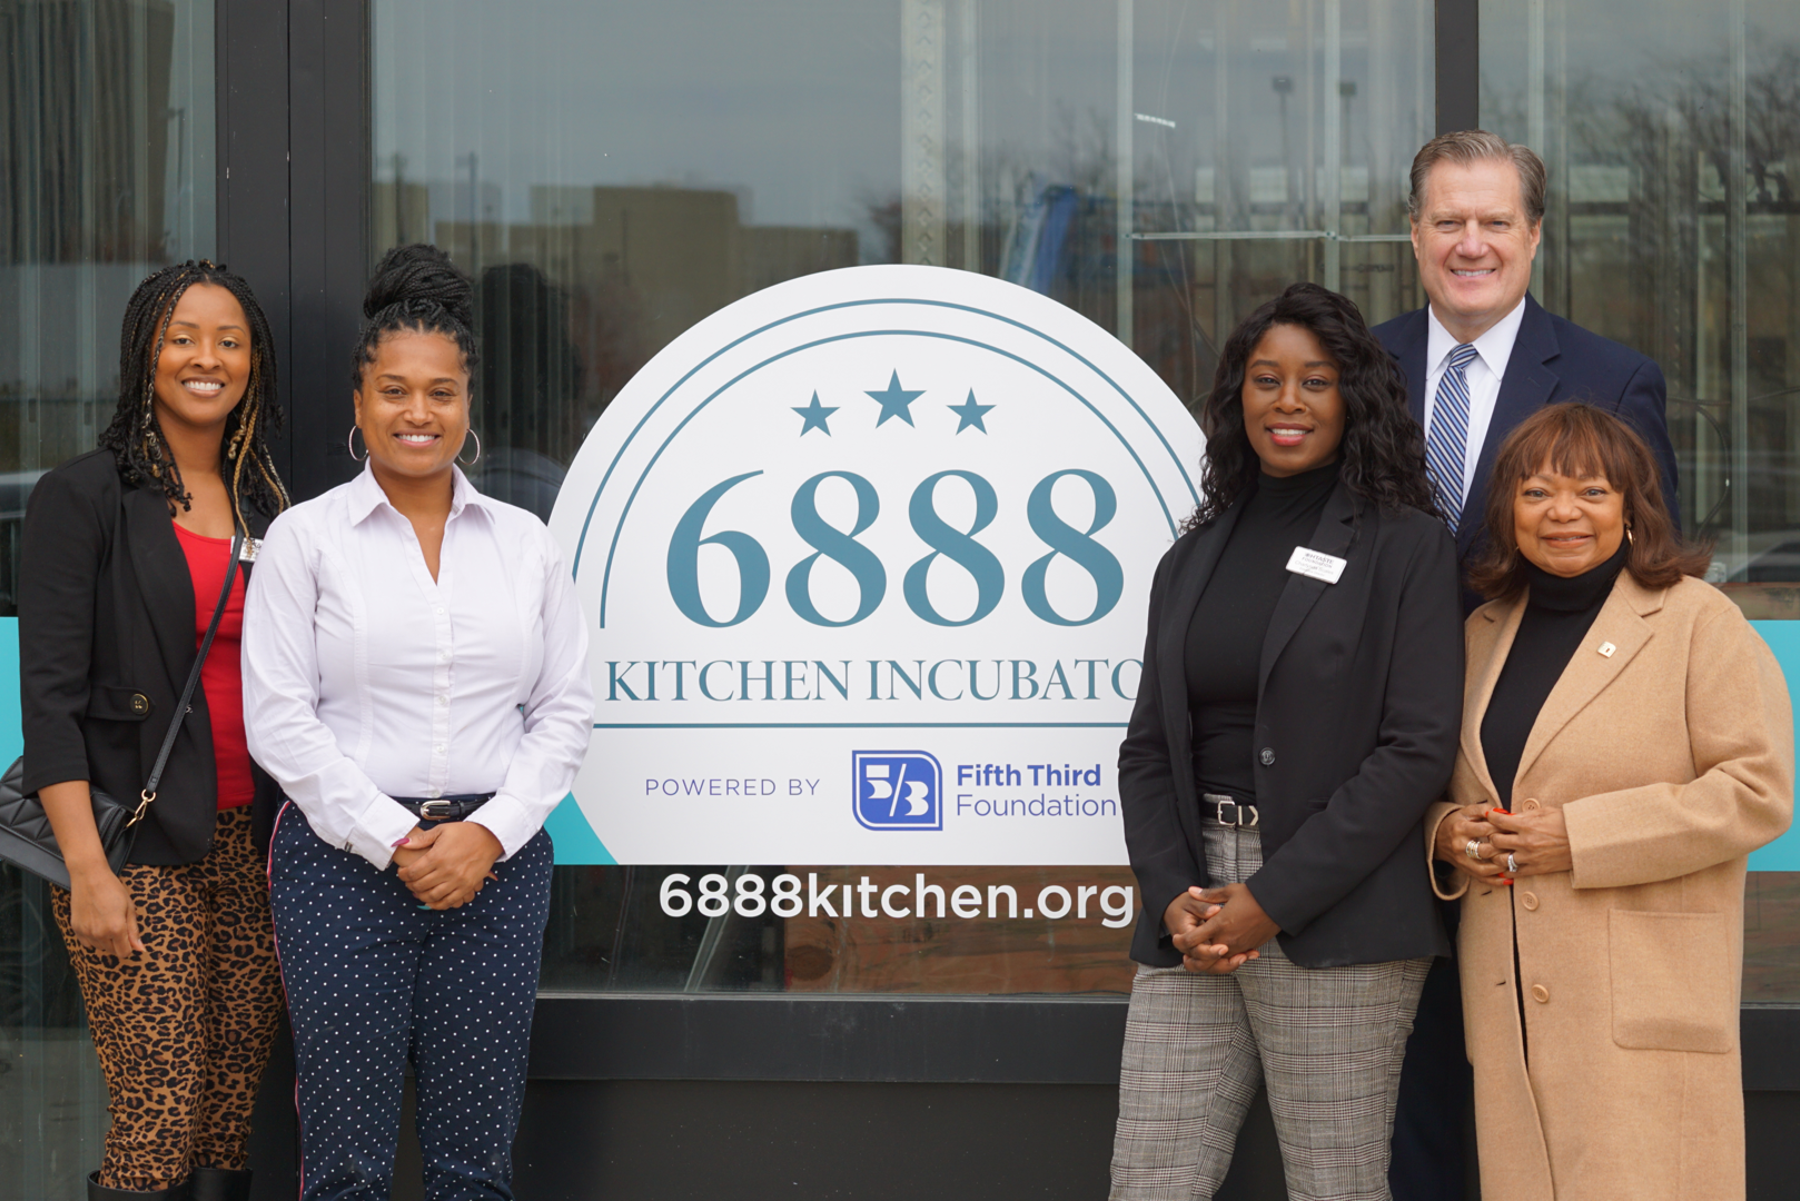 Congressman Turner with 6888 Kitchen Incubator founders: Jamaica White, Dabriah Rice, and Charlynda Scales, as well as Marya Rutherford-Long.